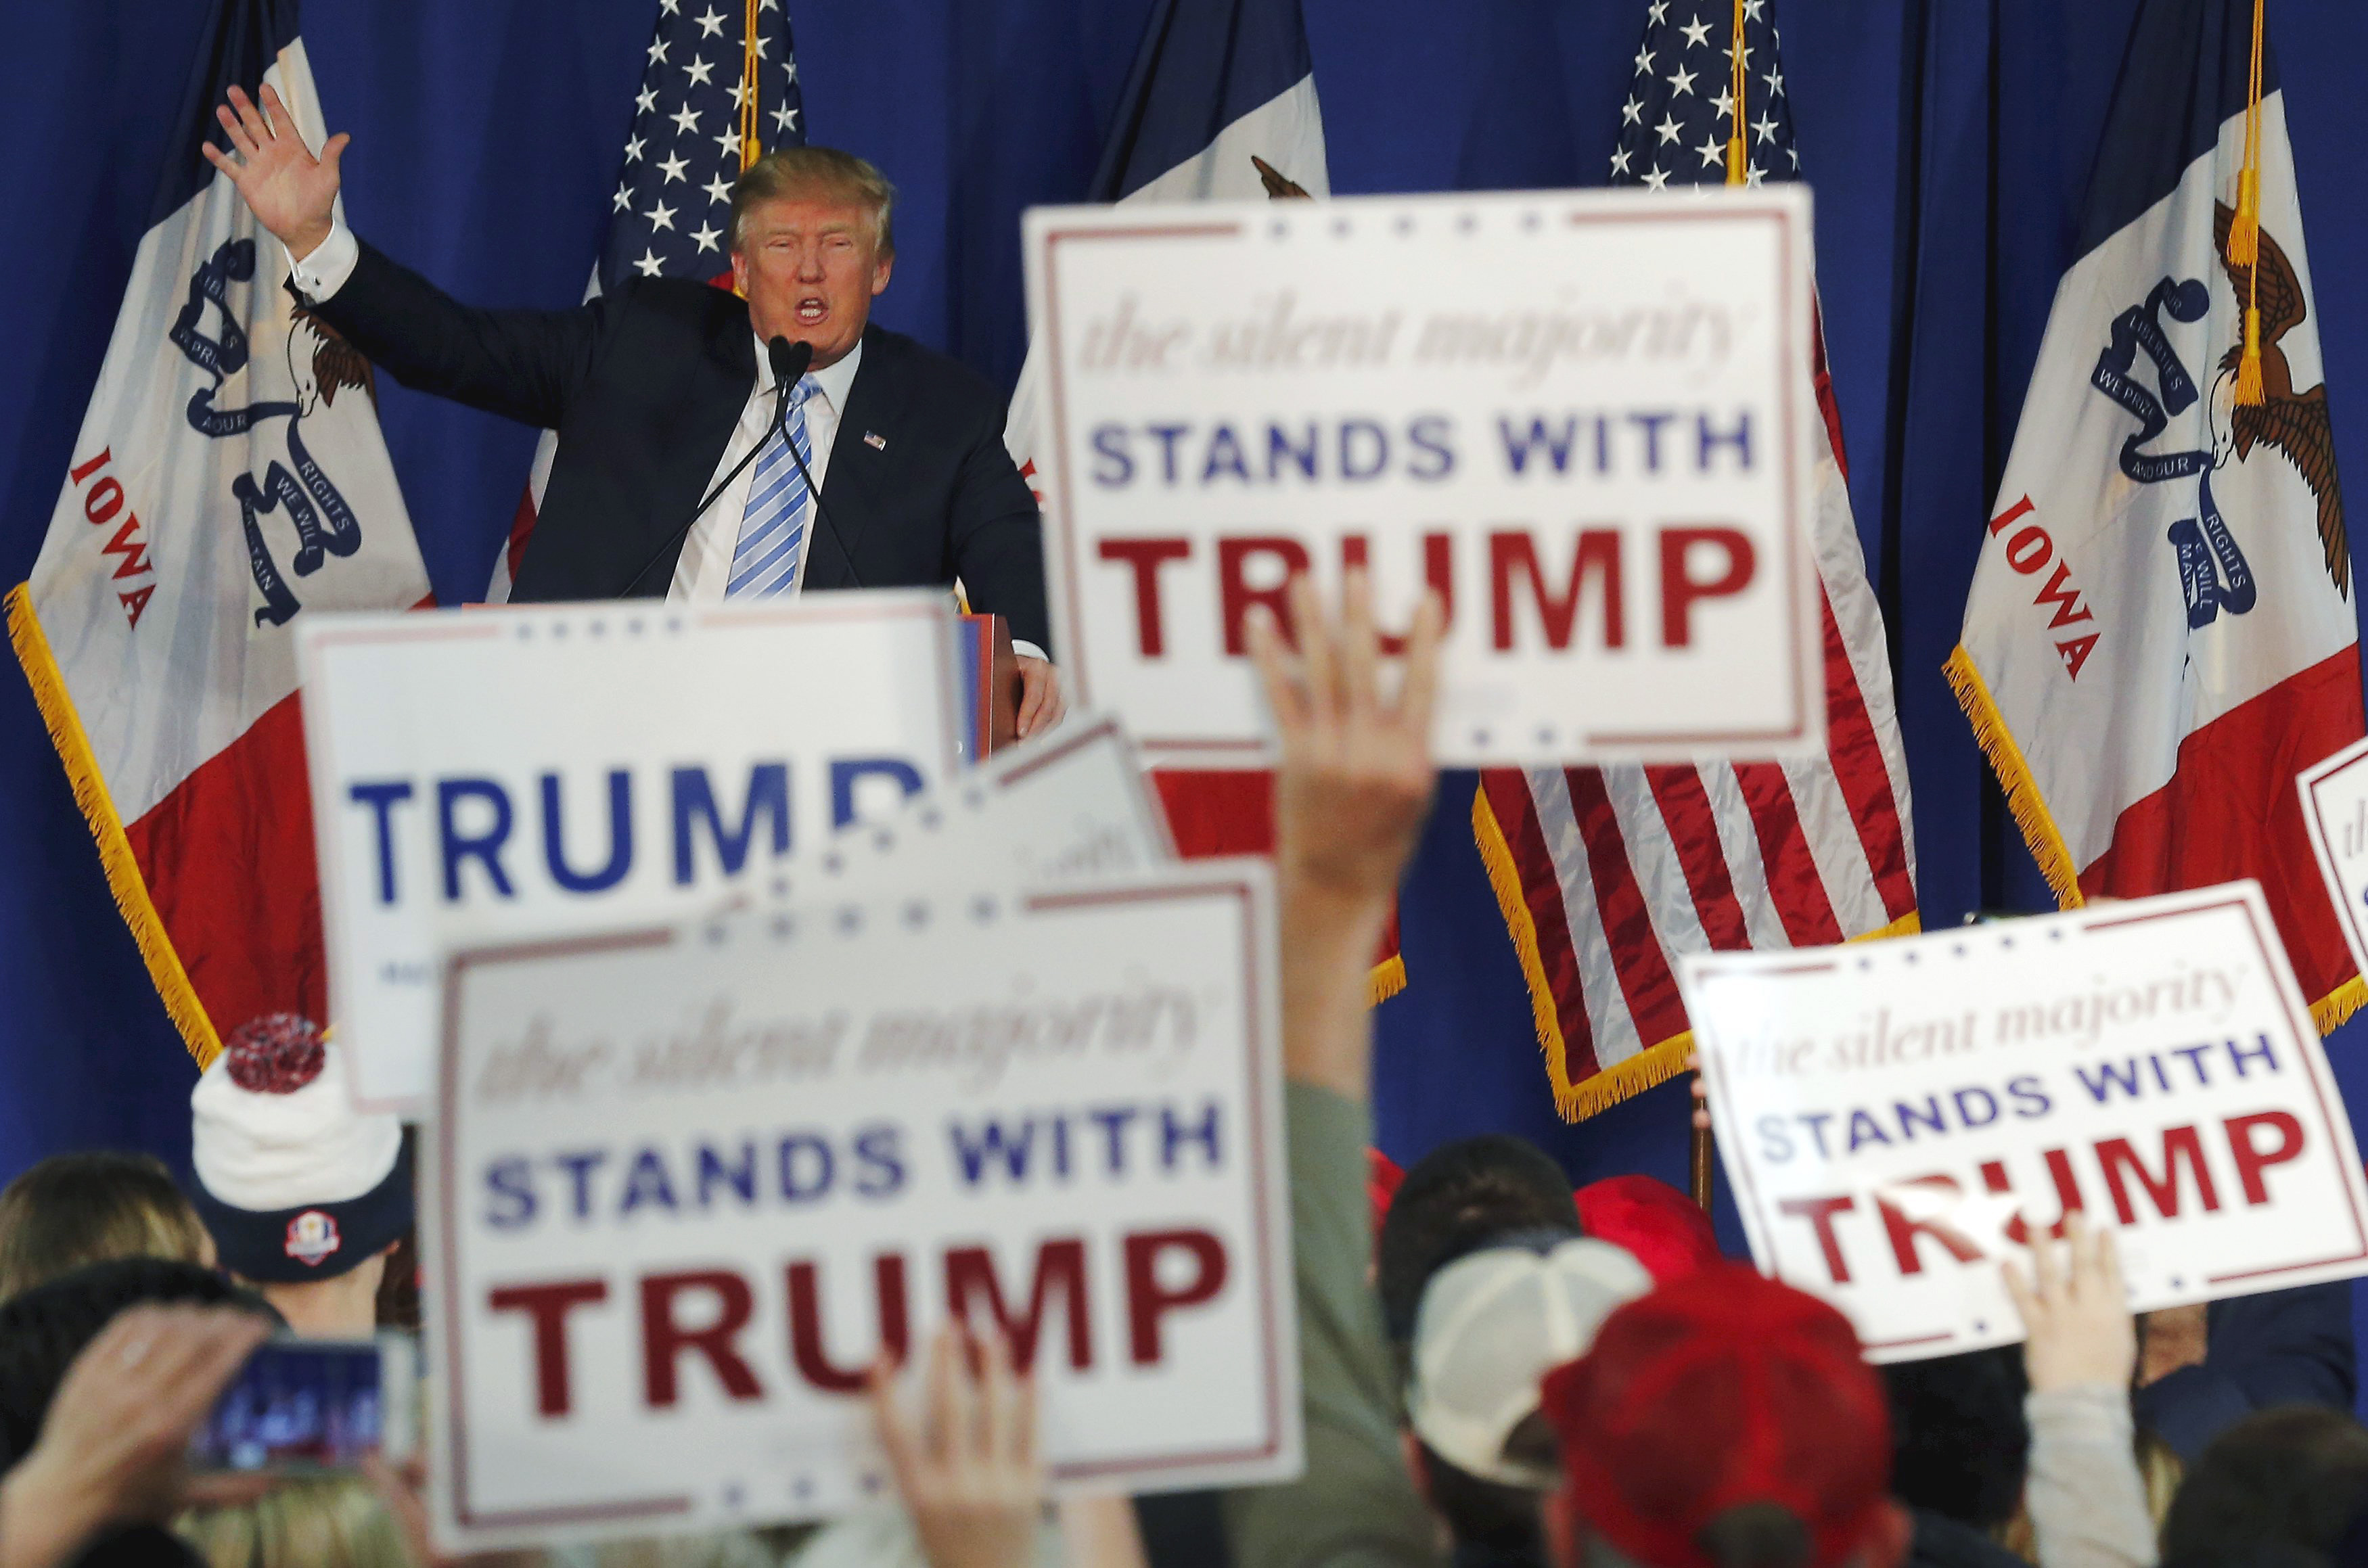 Republican presidential candidate Donald Trump speaks at a campaign event in Muscatine, Iowa on Jan. 24, 2016. (Jim Young—Reuters)